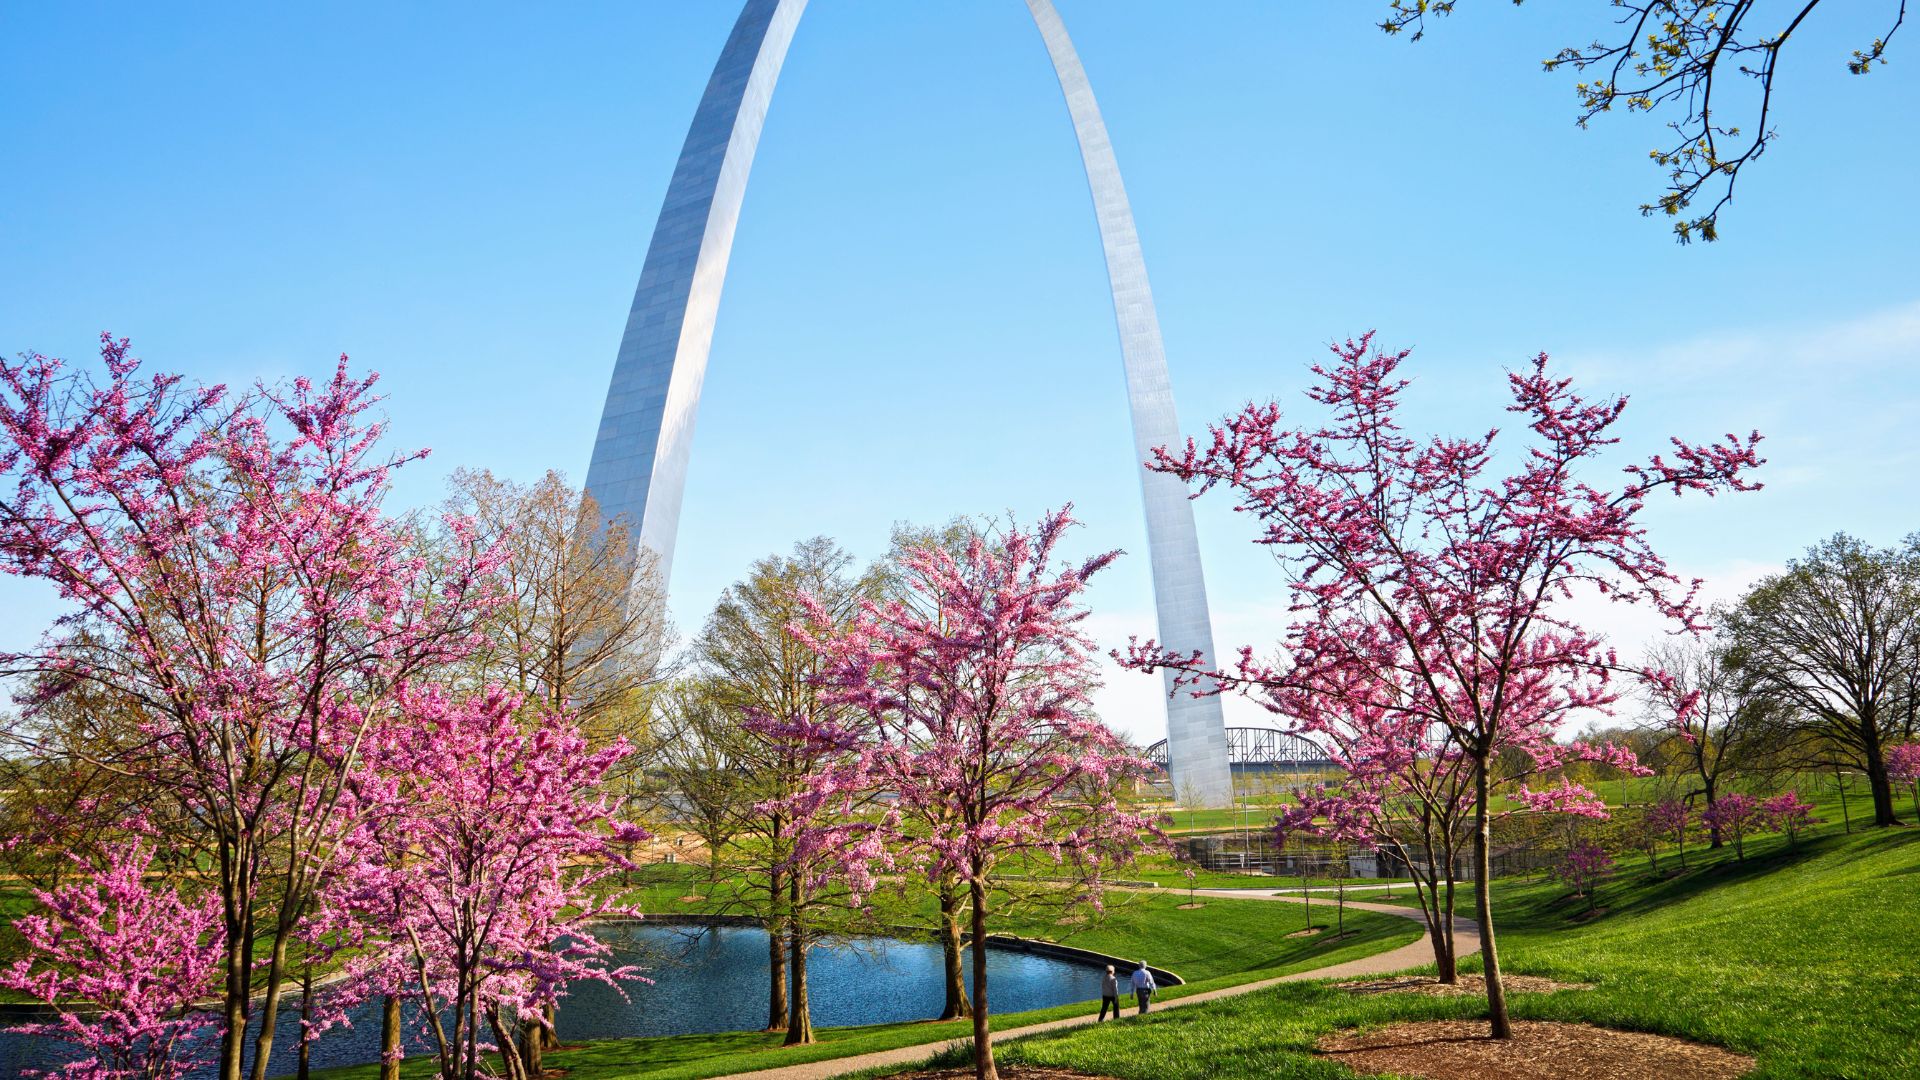 Flowering dogwoods add color to Gateway Arch National Park in the spring.